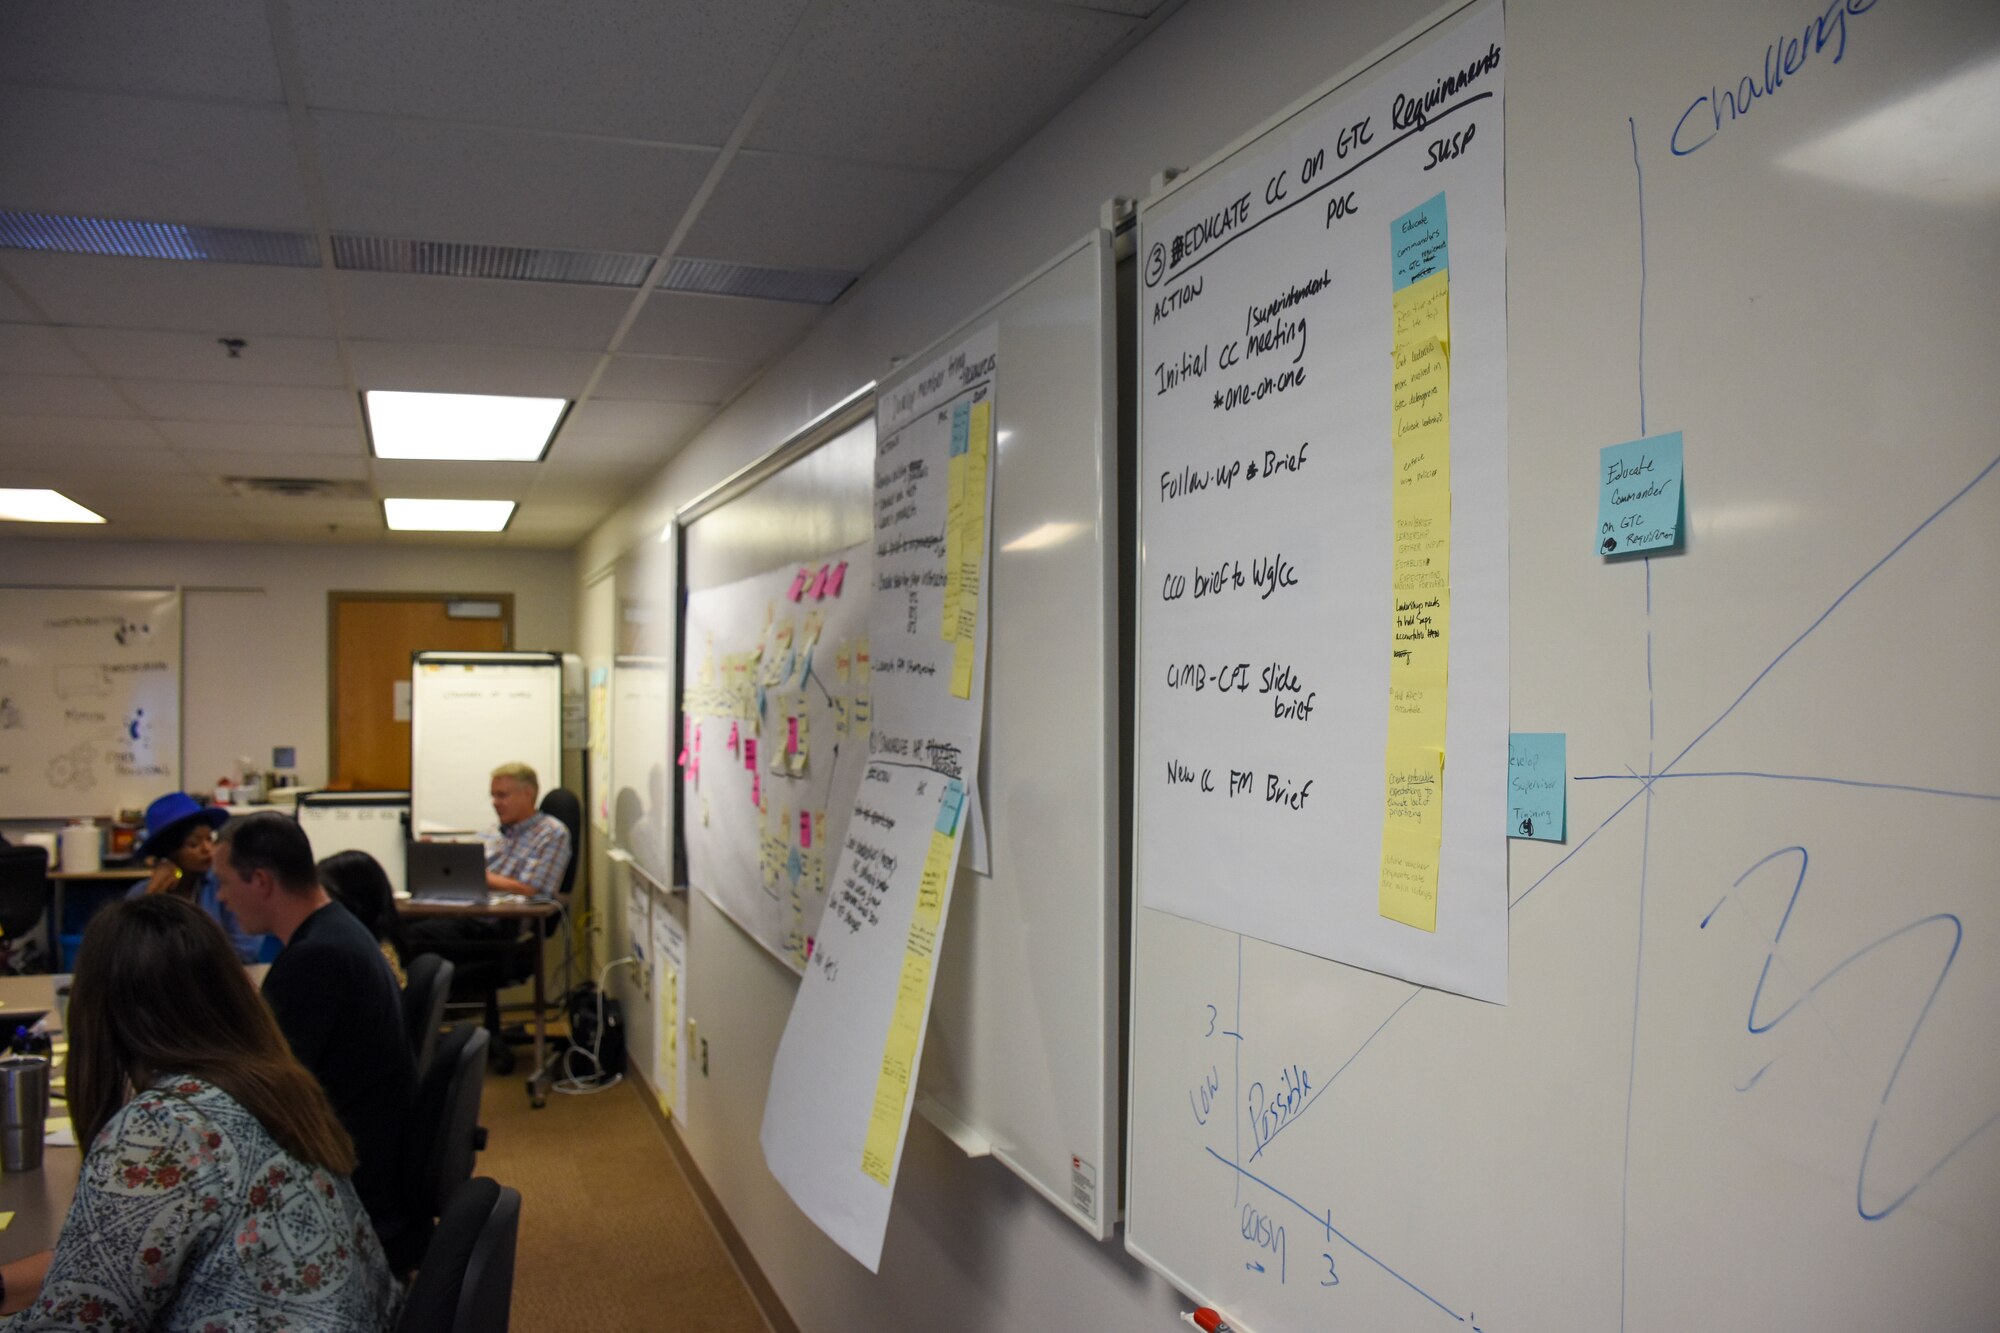 Three giant sticky notes hang on a whiteboard, recording steps of the action plan.